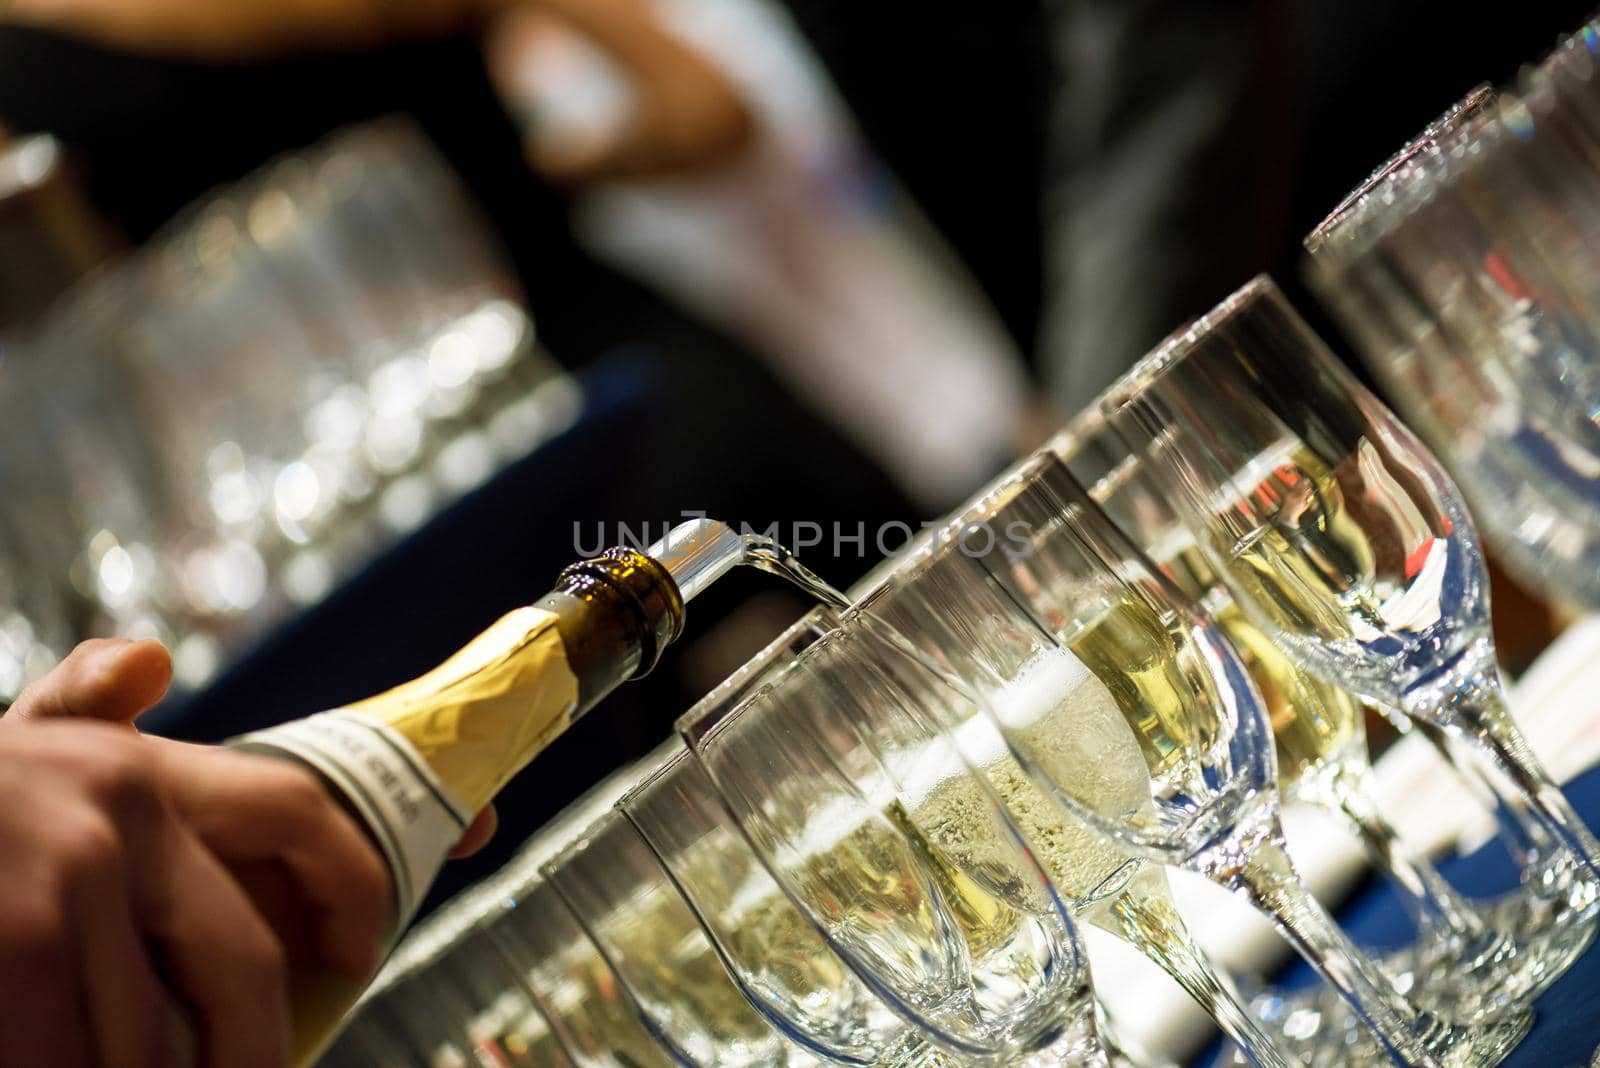 Bartender pouring champagne into glasses at party.